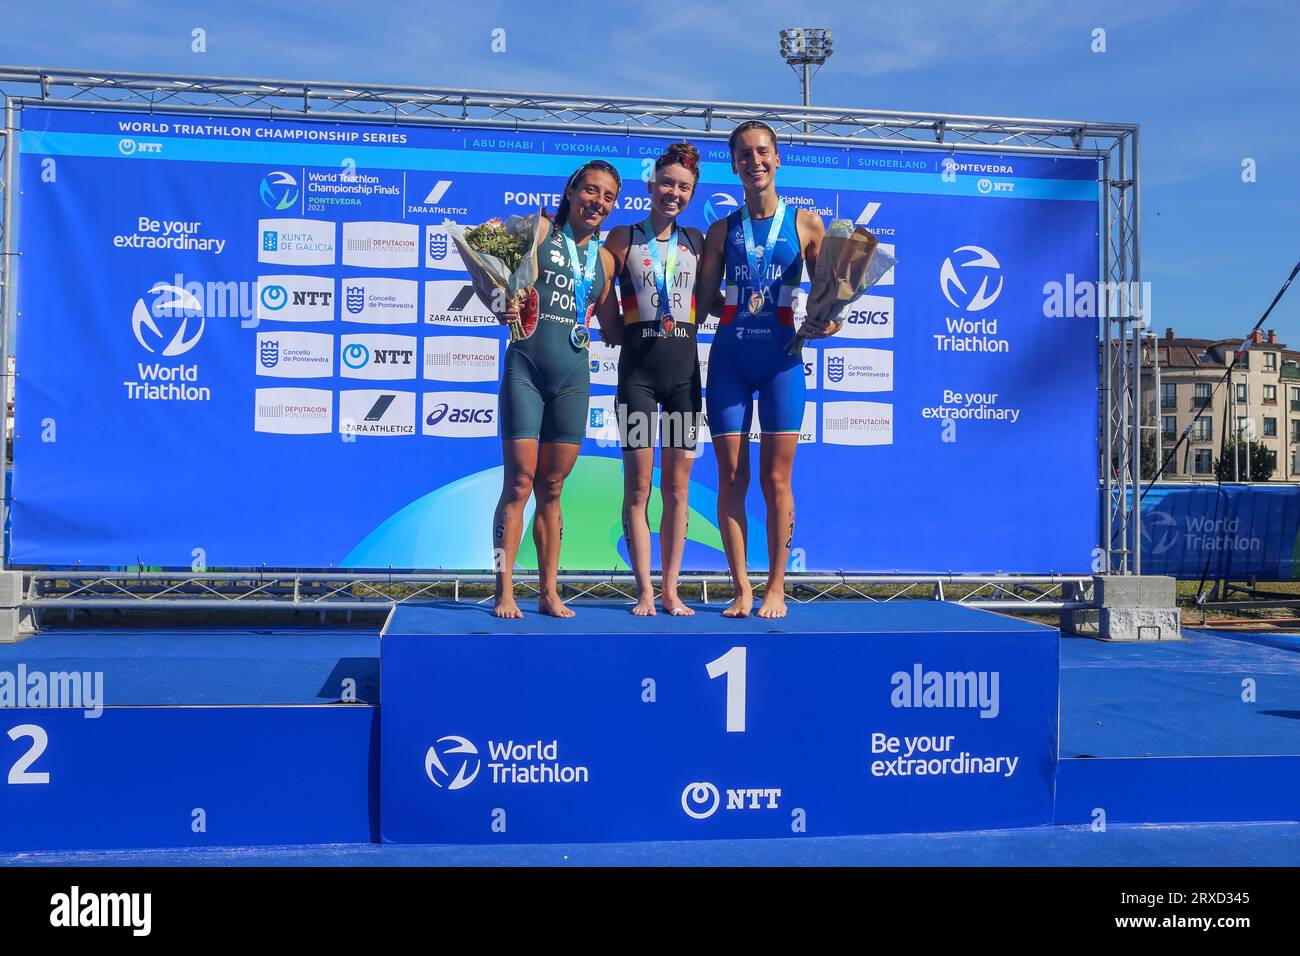 Pontevedra, Spain, 24th September, 2023: The final podium of the World Championship with the German triathlete, Selina Klamt, the Portuguese triathlete, Maria Tomé (L) and the Italian triathlete, Angelica Prestia (R) during the Triathlon World Championships 2023 Women's Sub23, on September 24, 2023, in Pontevedra, Spain. Credit: Alberto Brevers / Alamy Live News. Stock Photo